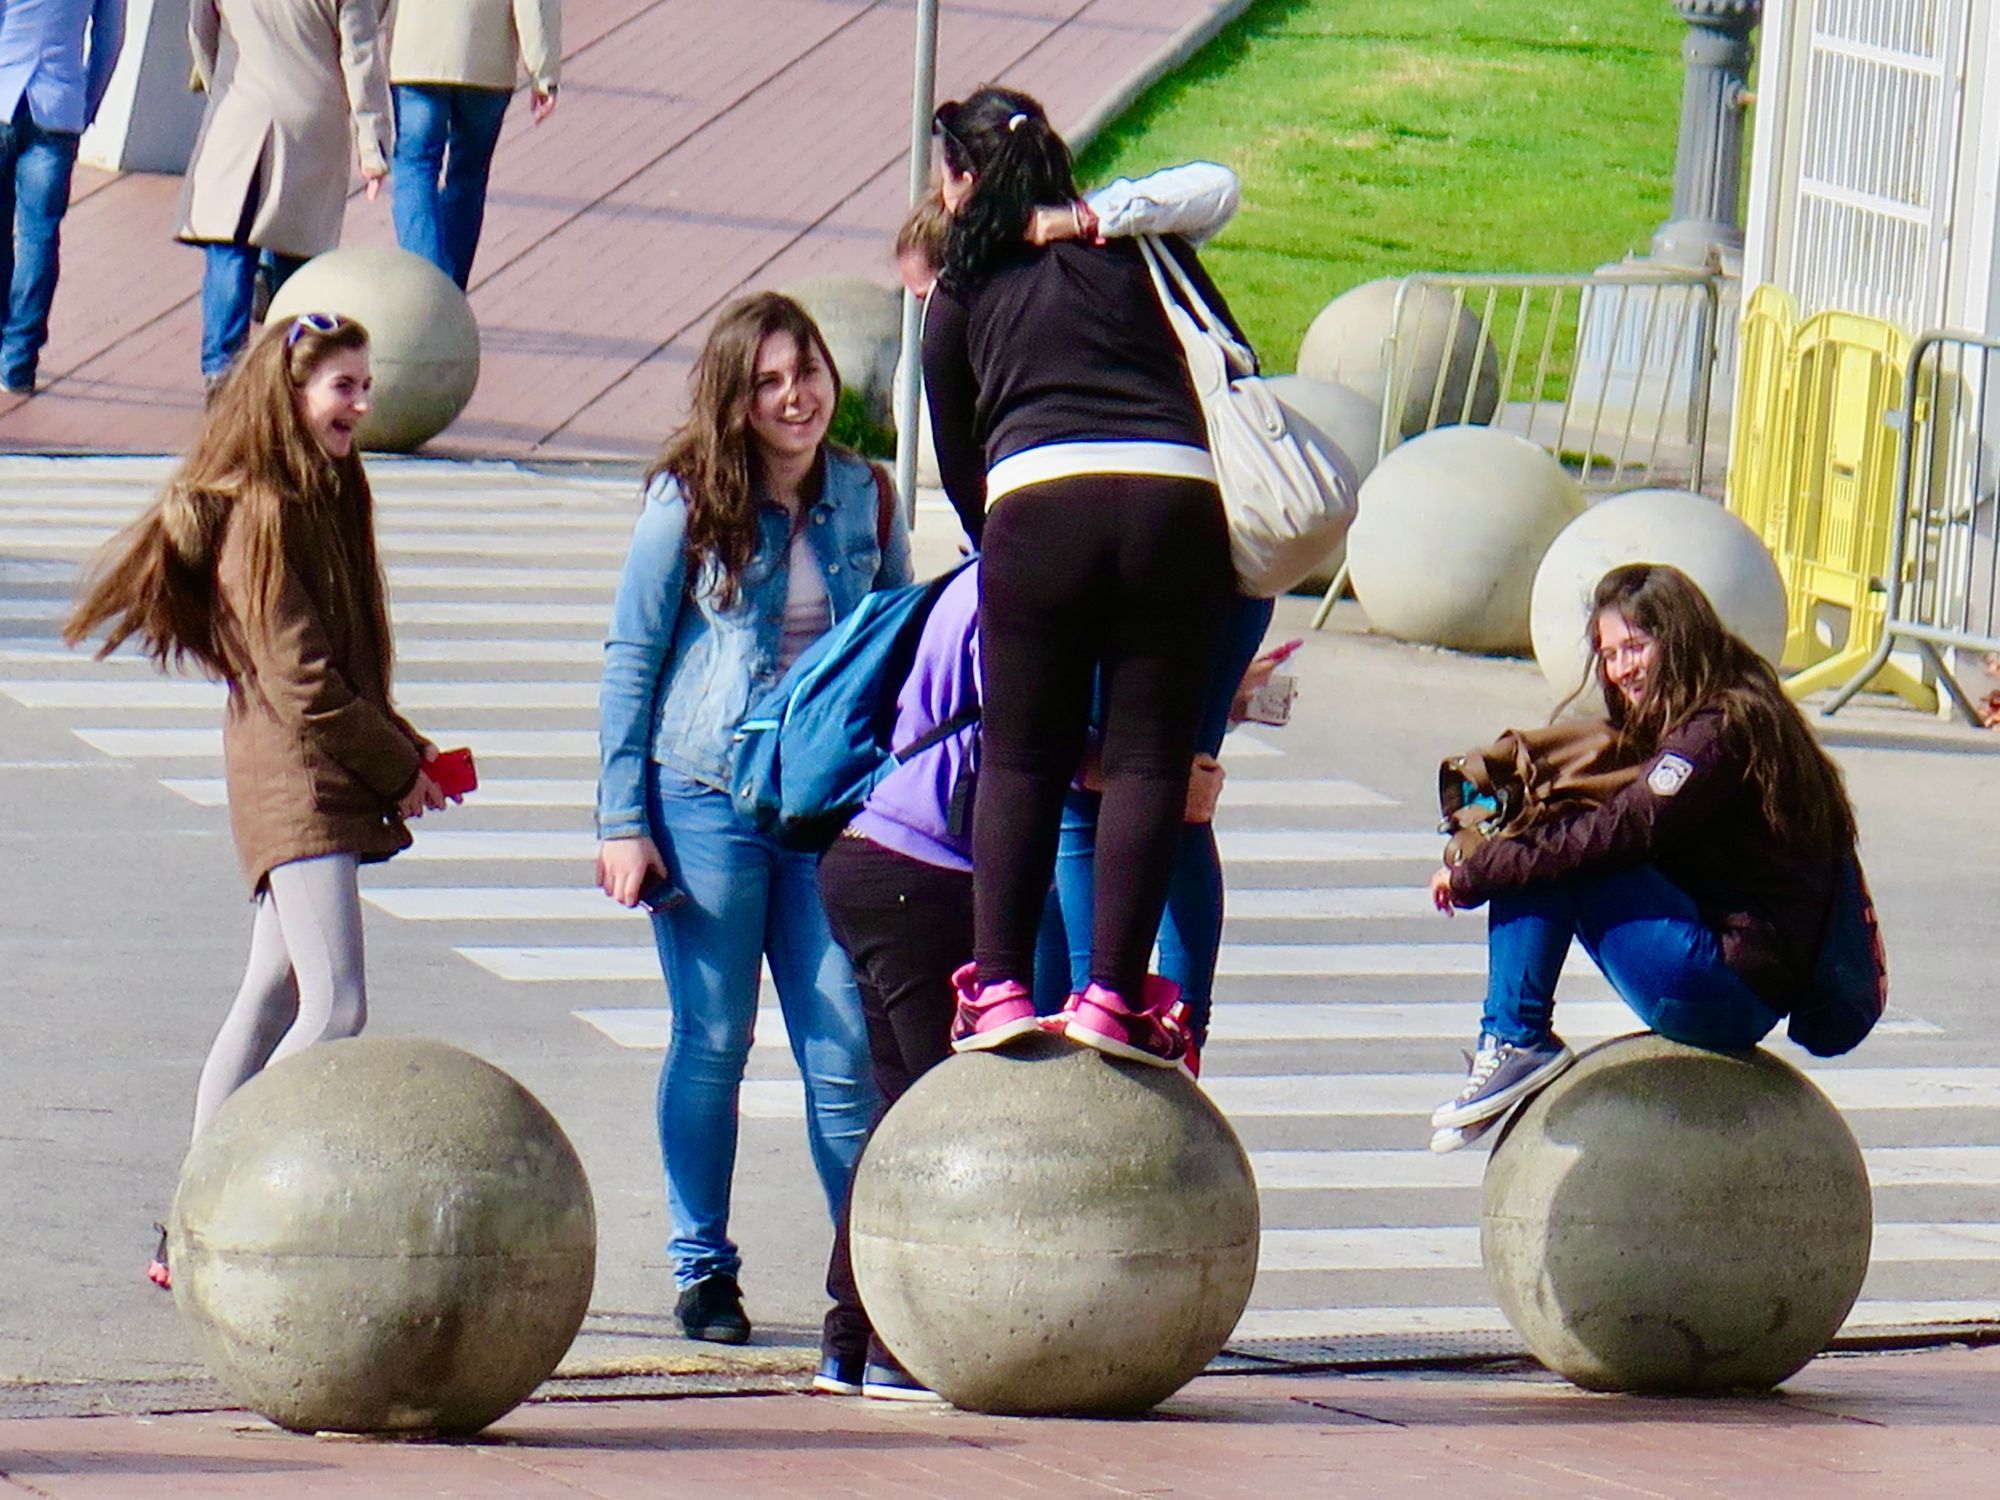 Bollards: How they add to our Social Life in Communities